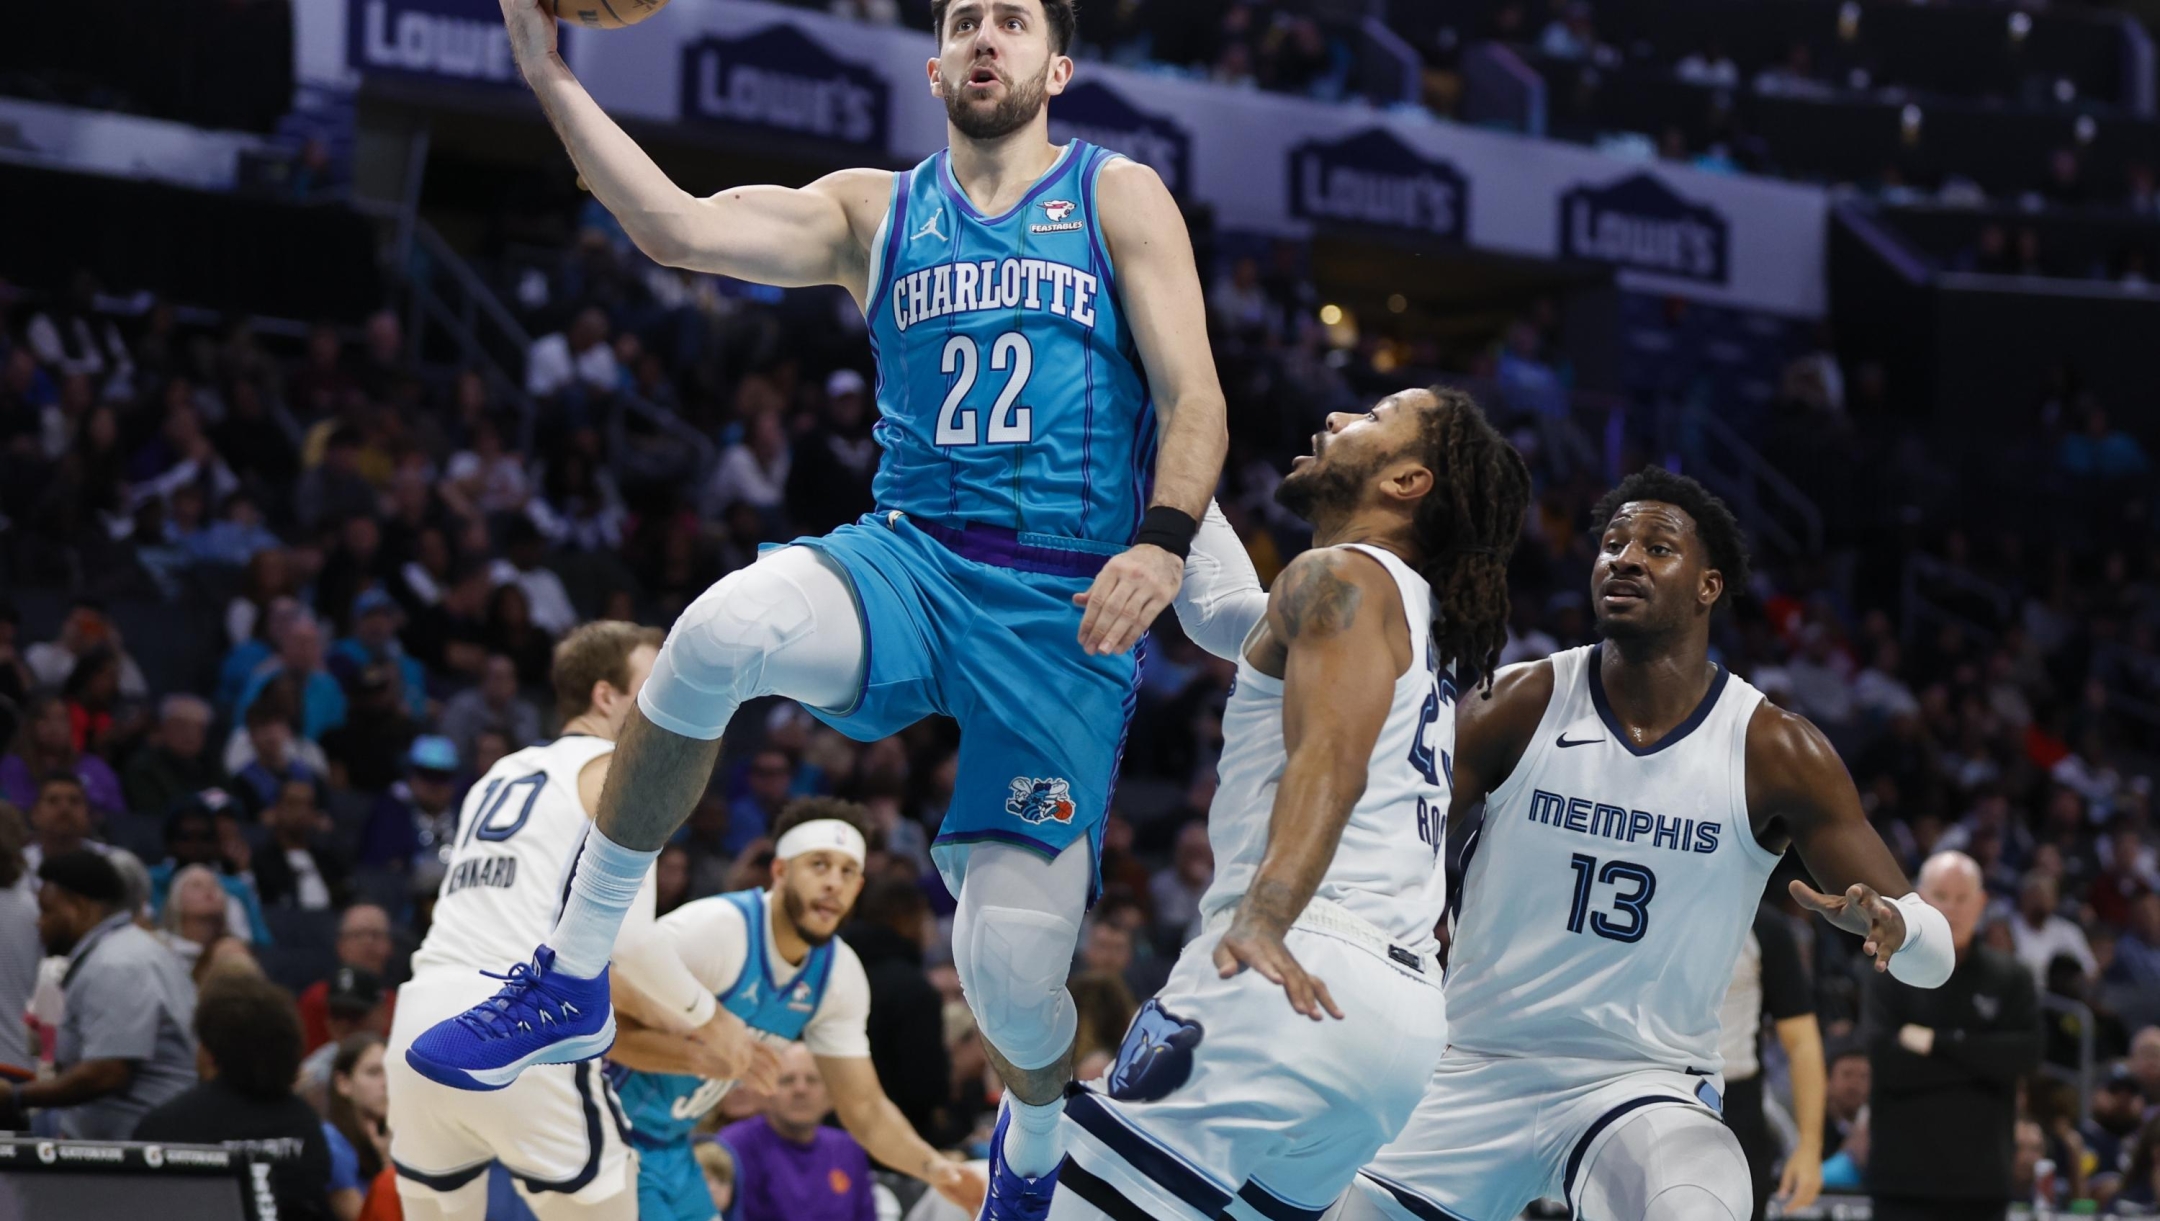 Charlotte Hornets guard Vasilije Micic (22) shoots against Memphis Grizzlies guard Derrick Rose, center, as forward Jaren Jackson Jr. (13) watches during the second half of an NBA basketball game in Charlotte, N.C., Saturday, Feb. 10, 2024. (AP Photo/Nell Redmond)